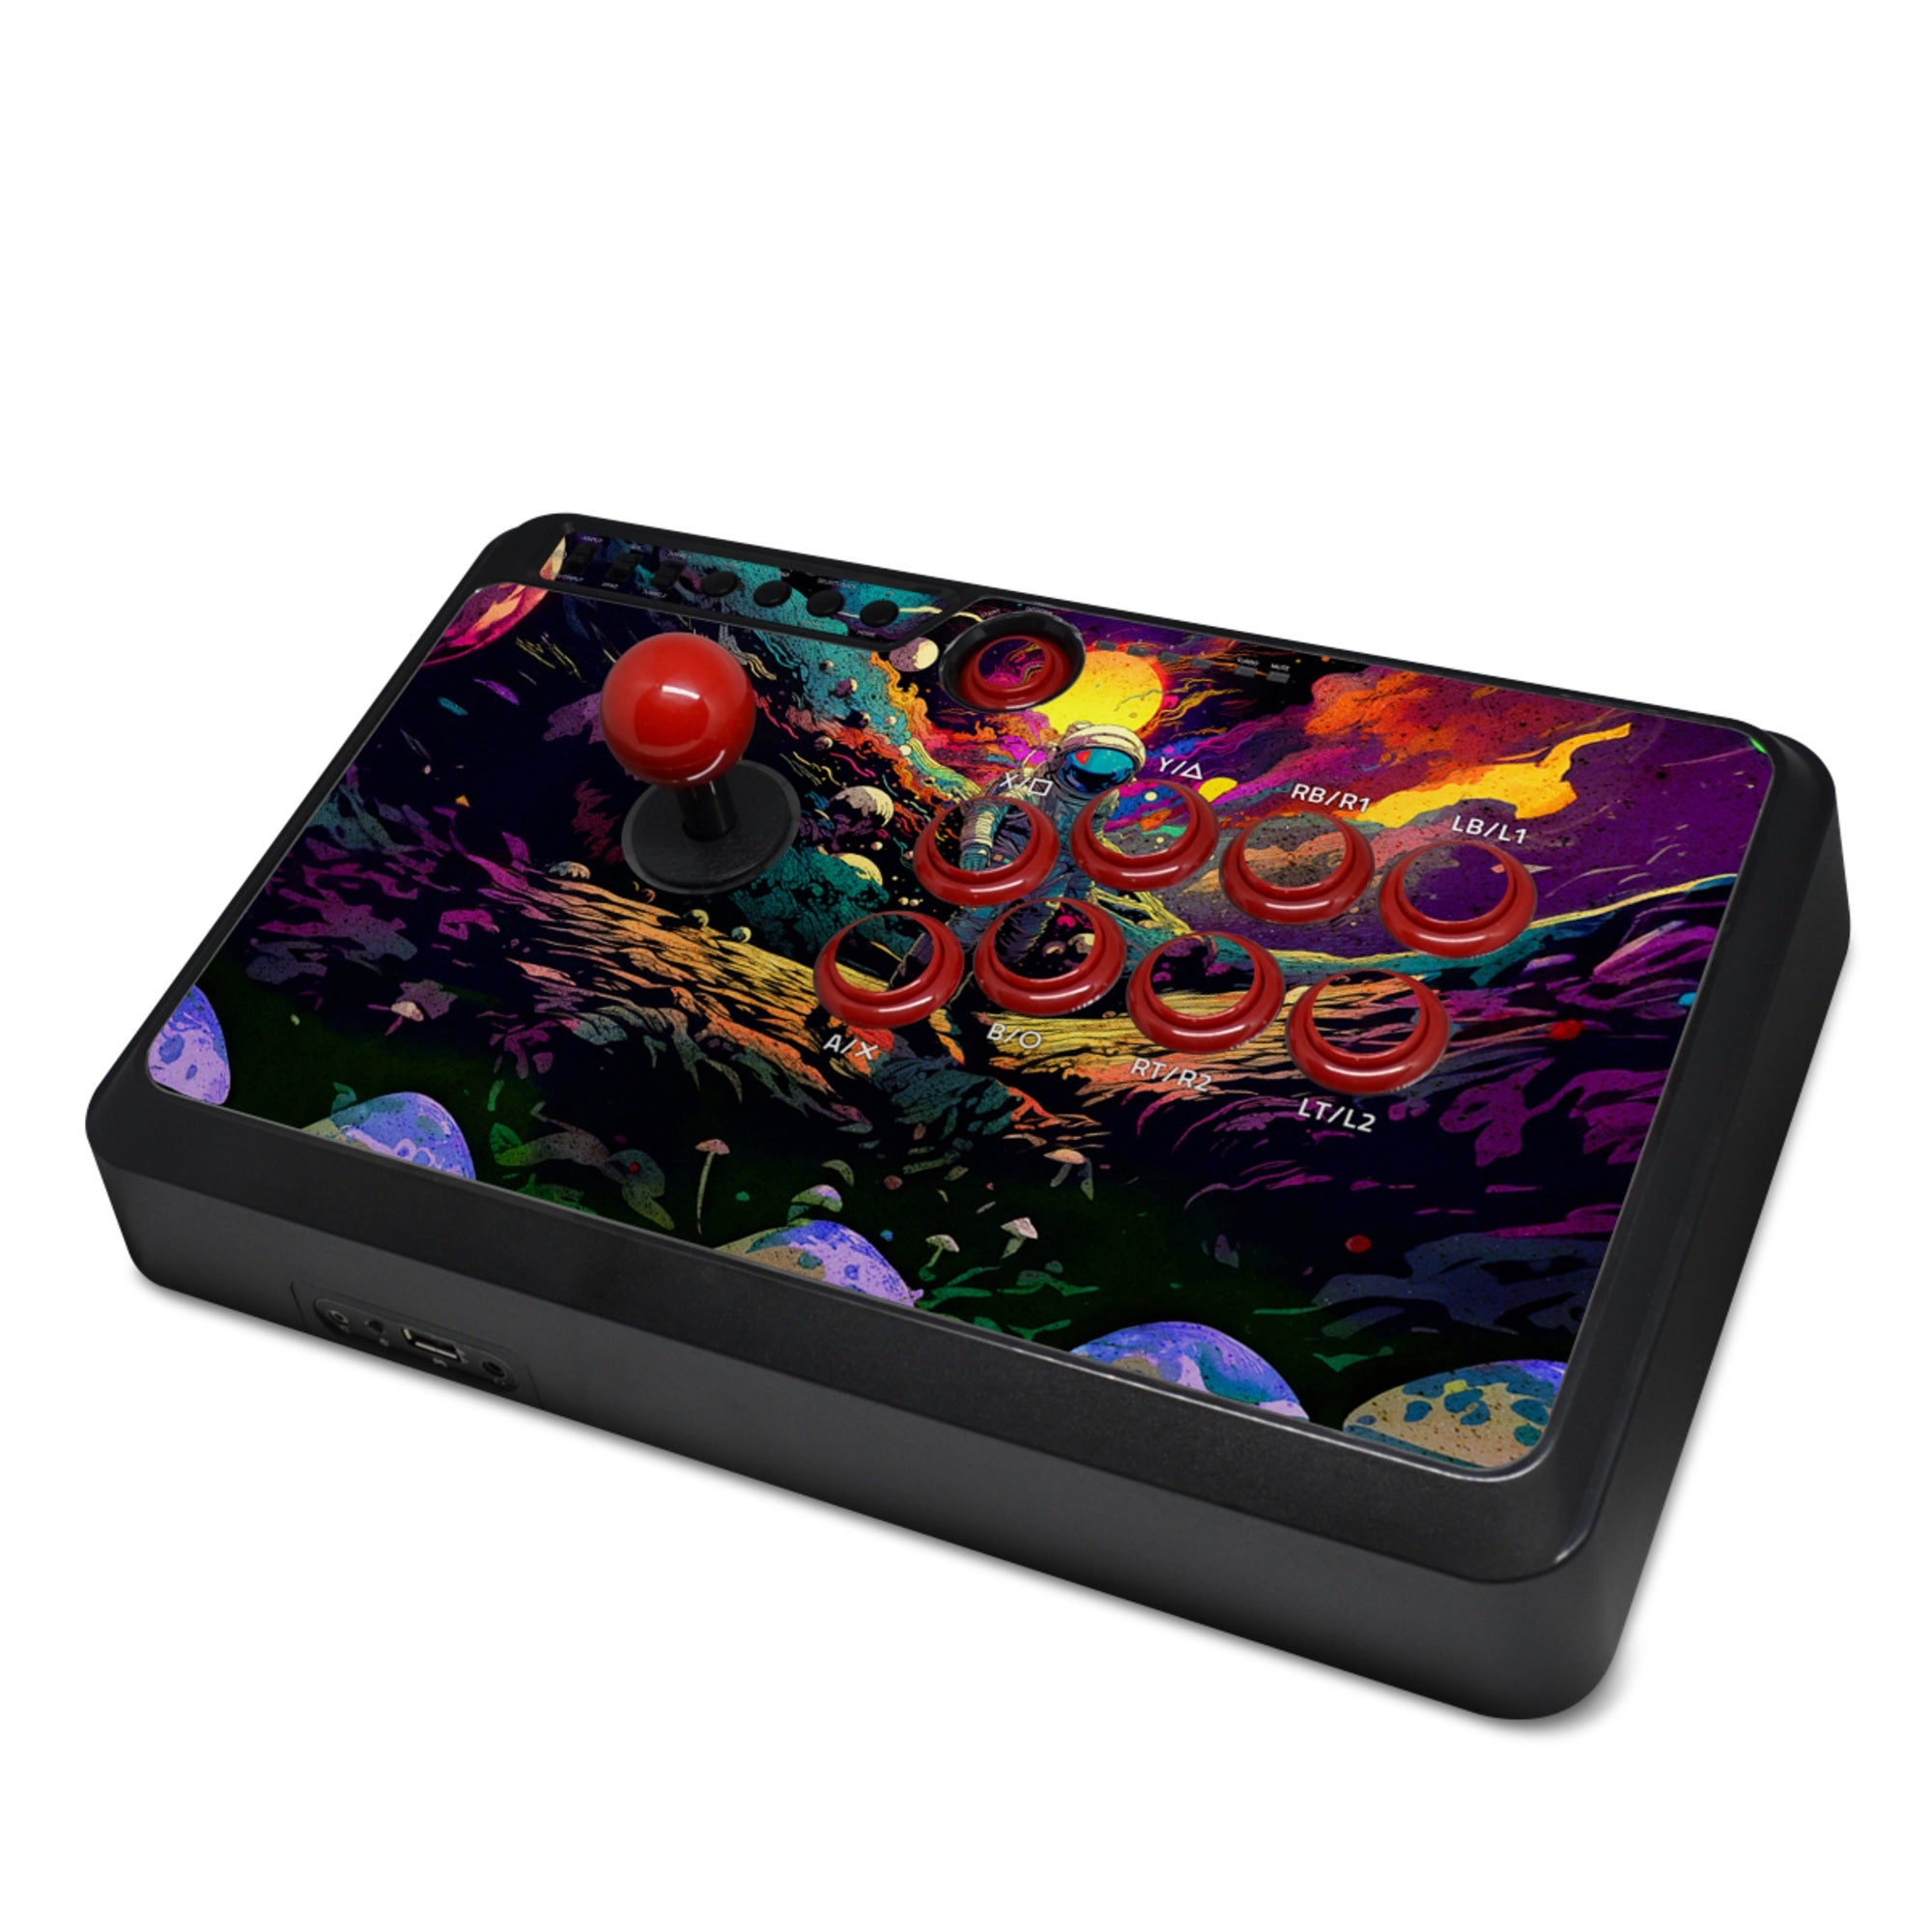 Trip to Space - Mayflash F500 Arcade Fightstick Skin